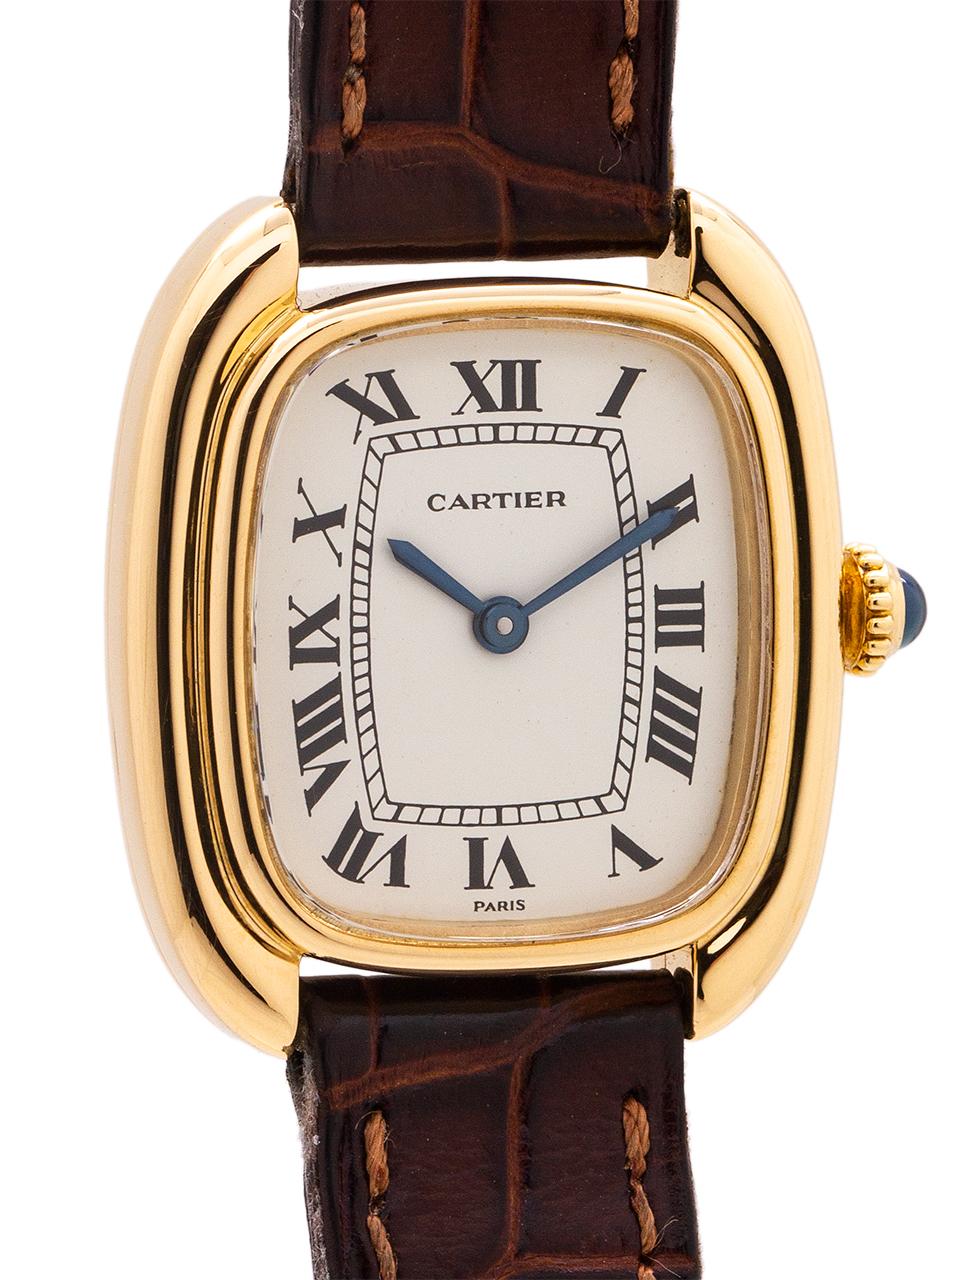 
Cartier 18K Yellow Gold lady Gondole model circa 1970’s. Scarce and great looking elongated 24 x 29mm cushion shaped case with sculpted and stepped sides. With mineral glass crystal and original glossy white classic Cartier dial with Roman figures